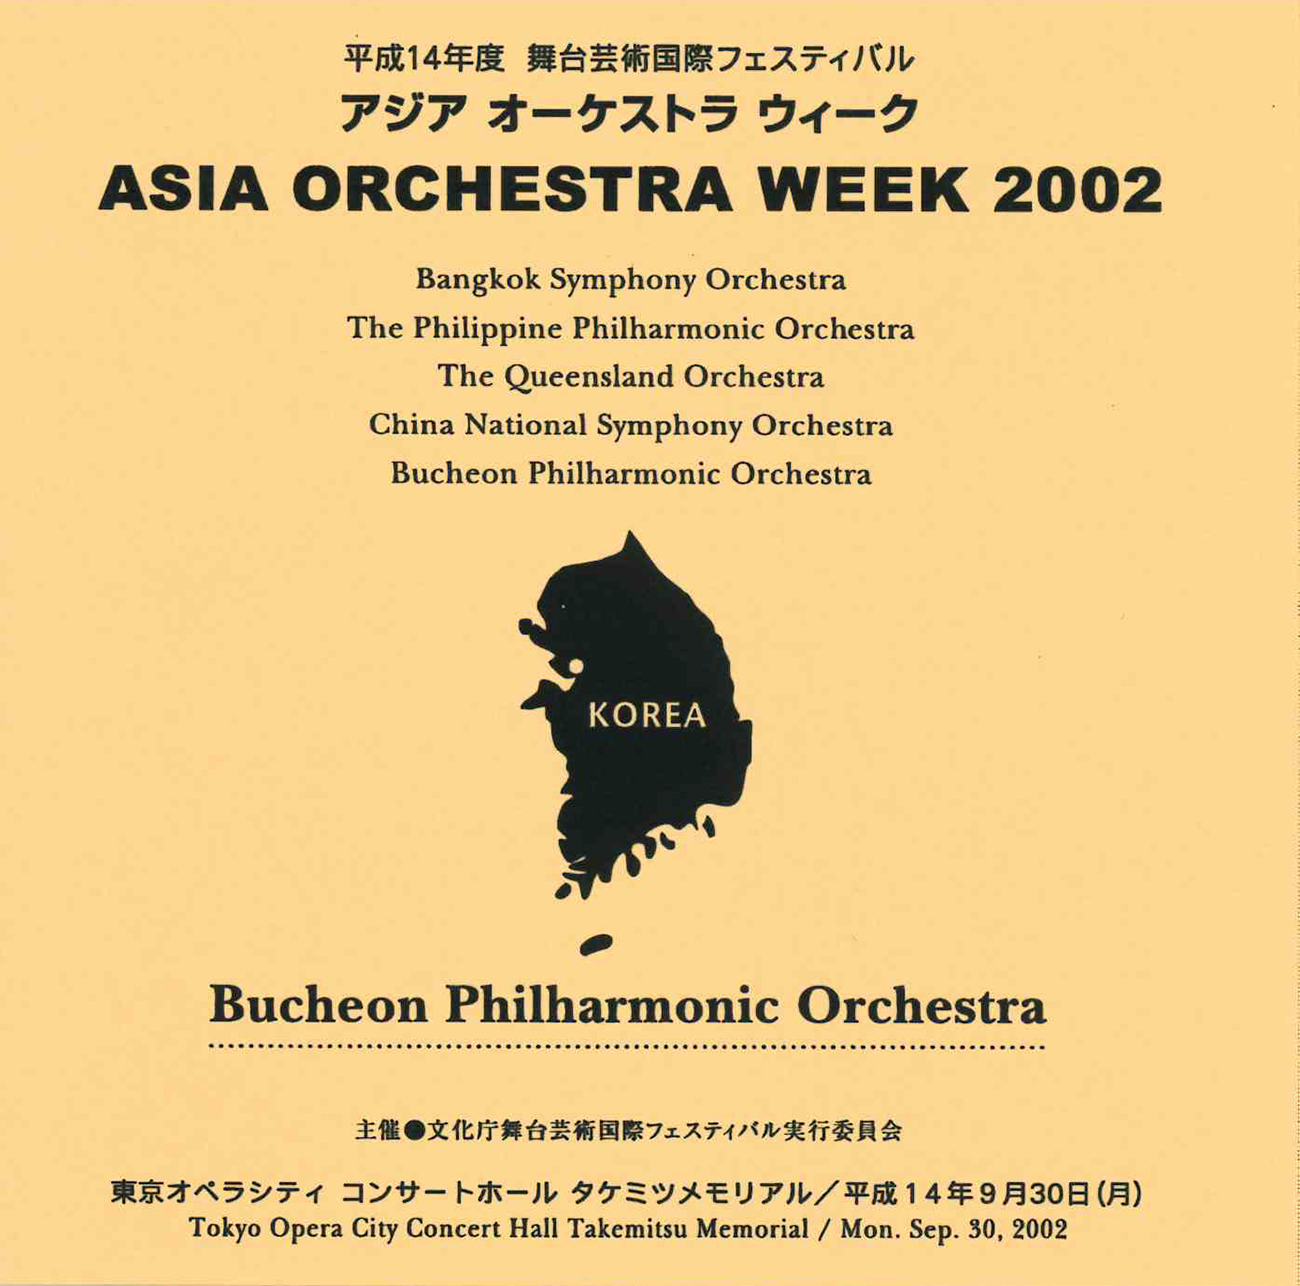  Asia Orchestra Week 2002